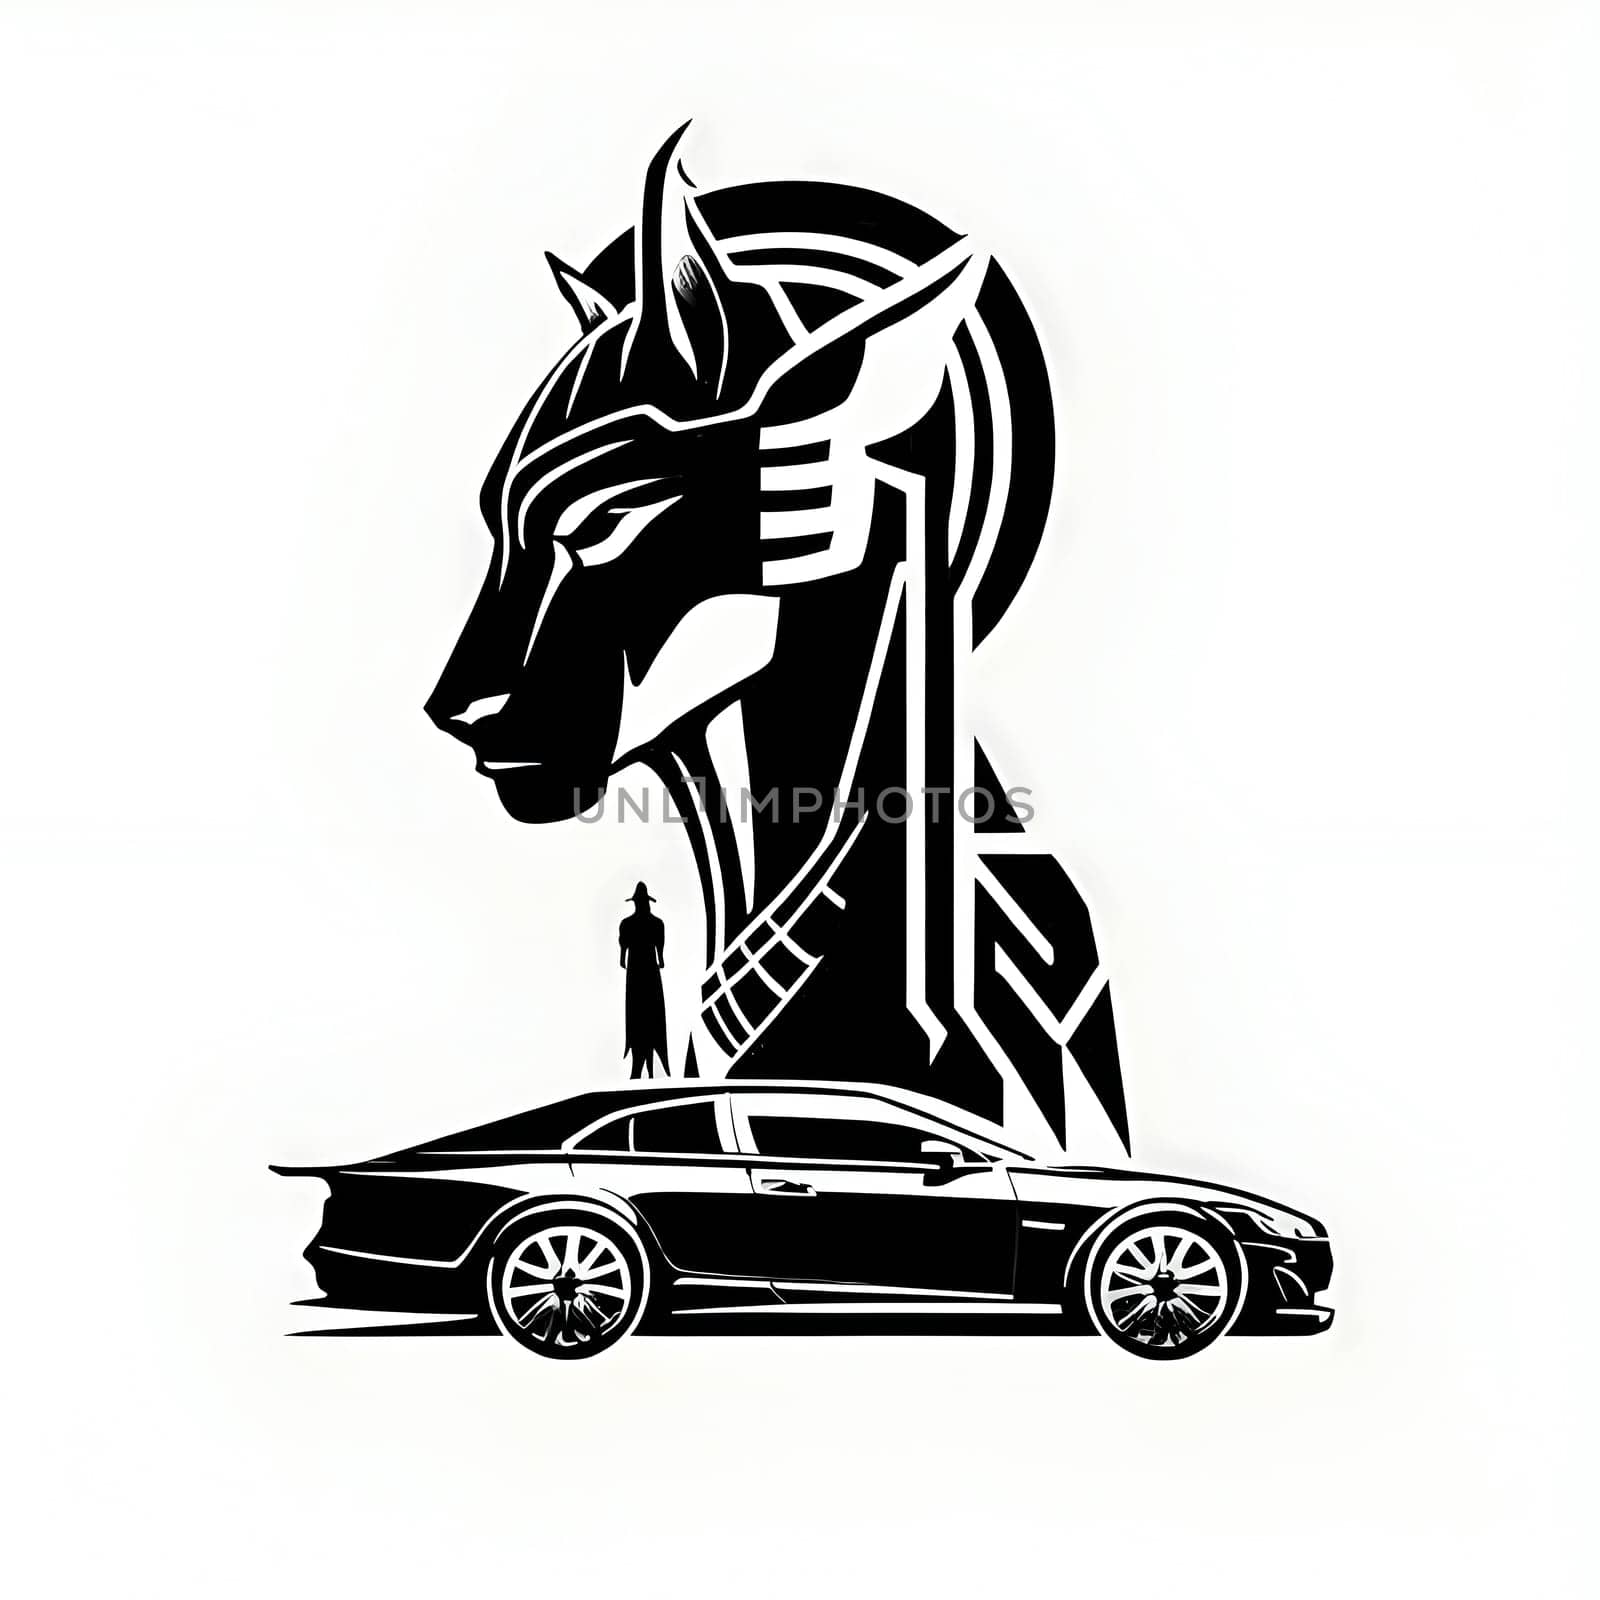 Vector illustration of horse and car in black silhouette against a clean white background, capturing graceful forms.